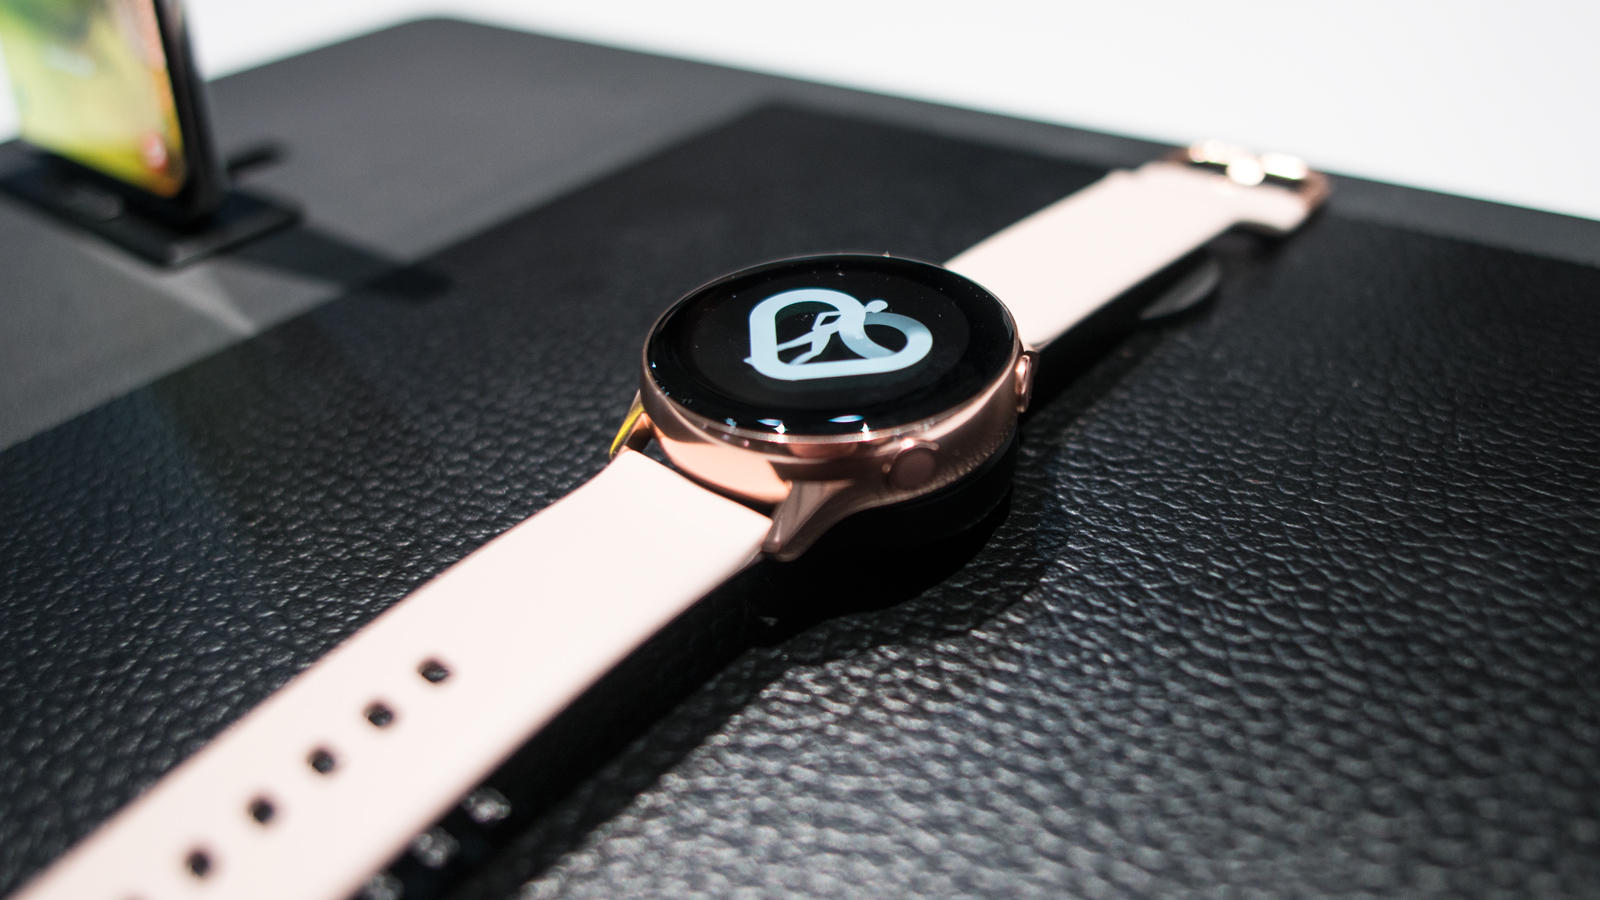 Samsung Galaxy Watch Active 2 may have two major Apple Watch 4